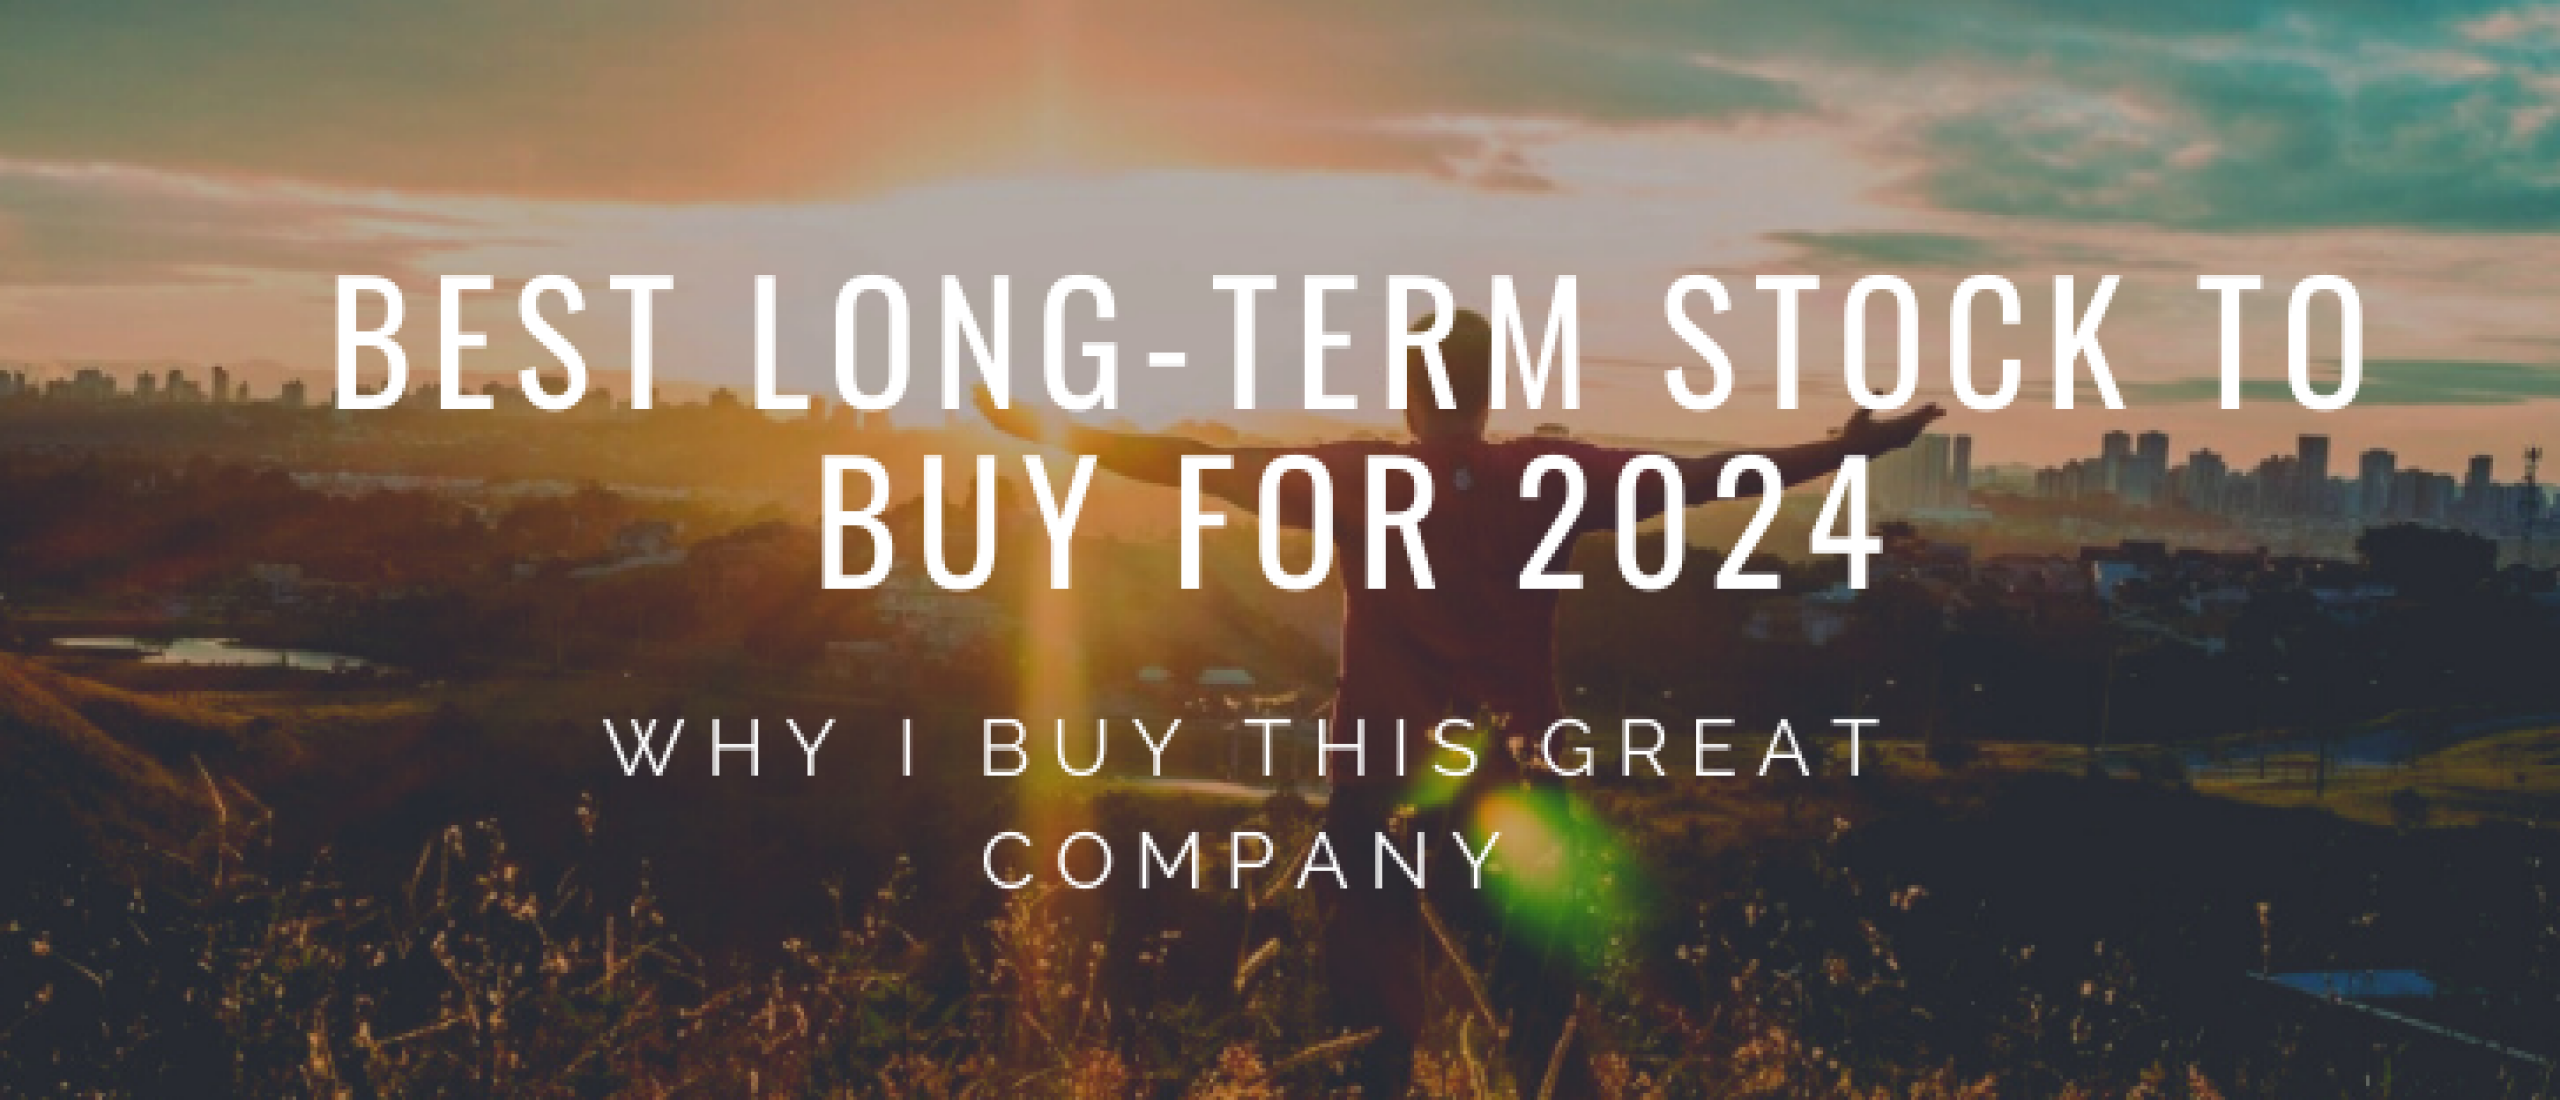 My Best Long-Term Stock to Buy for 2024 | Happy Investors